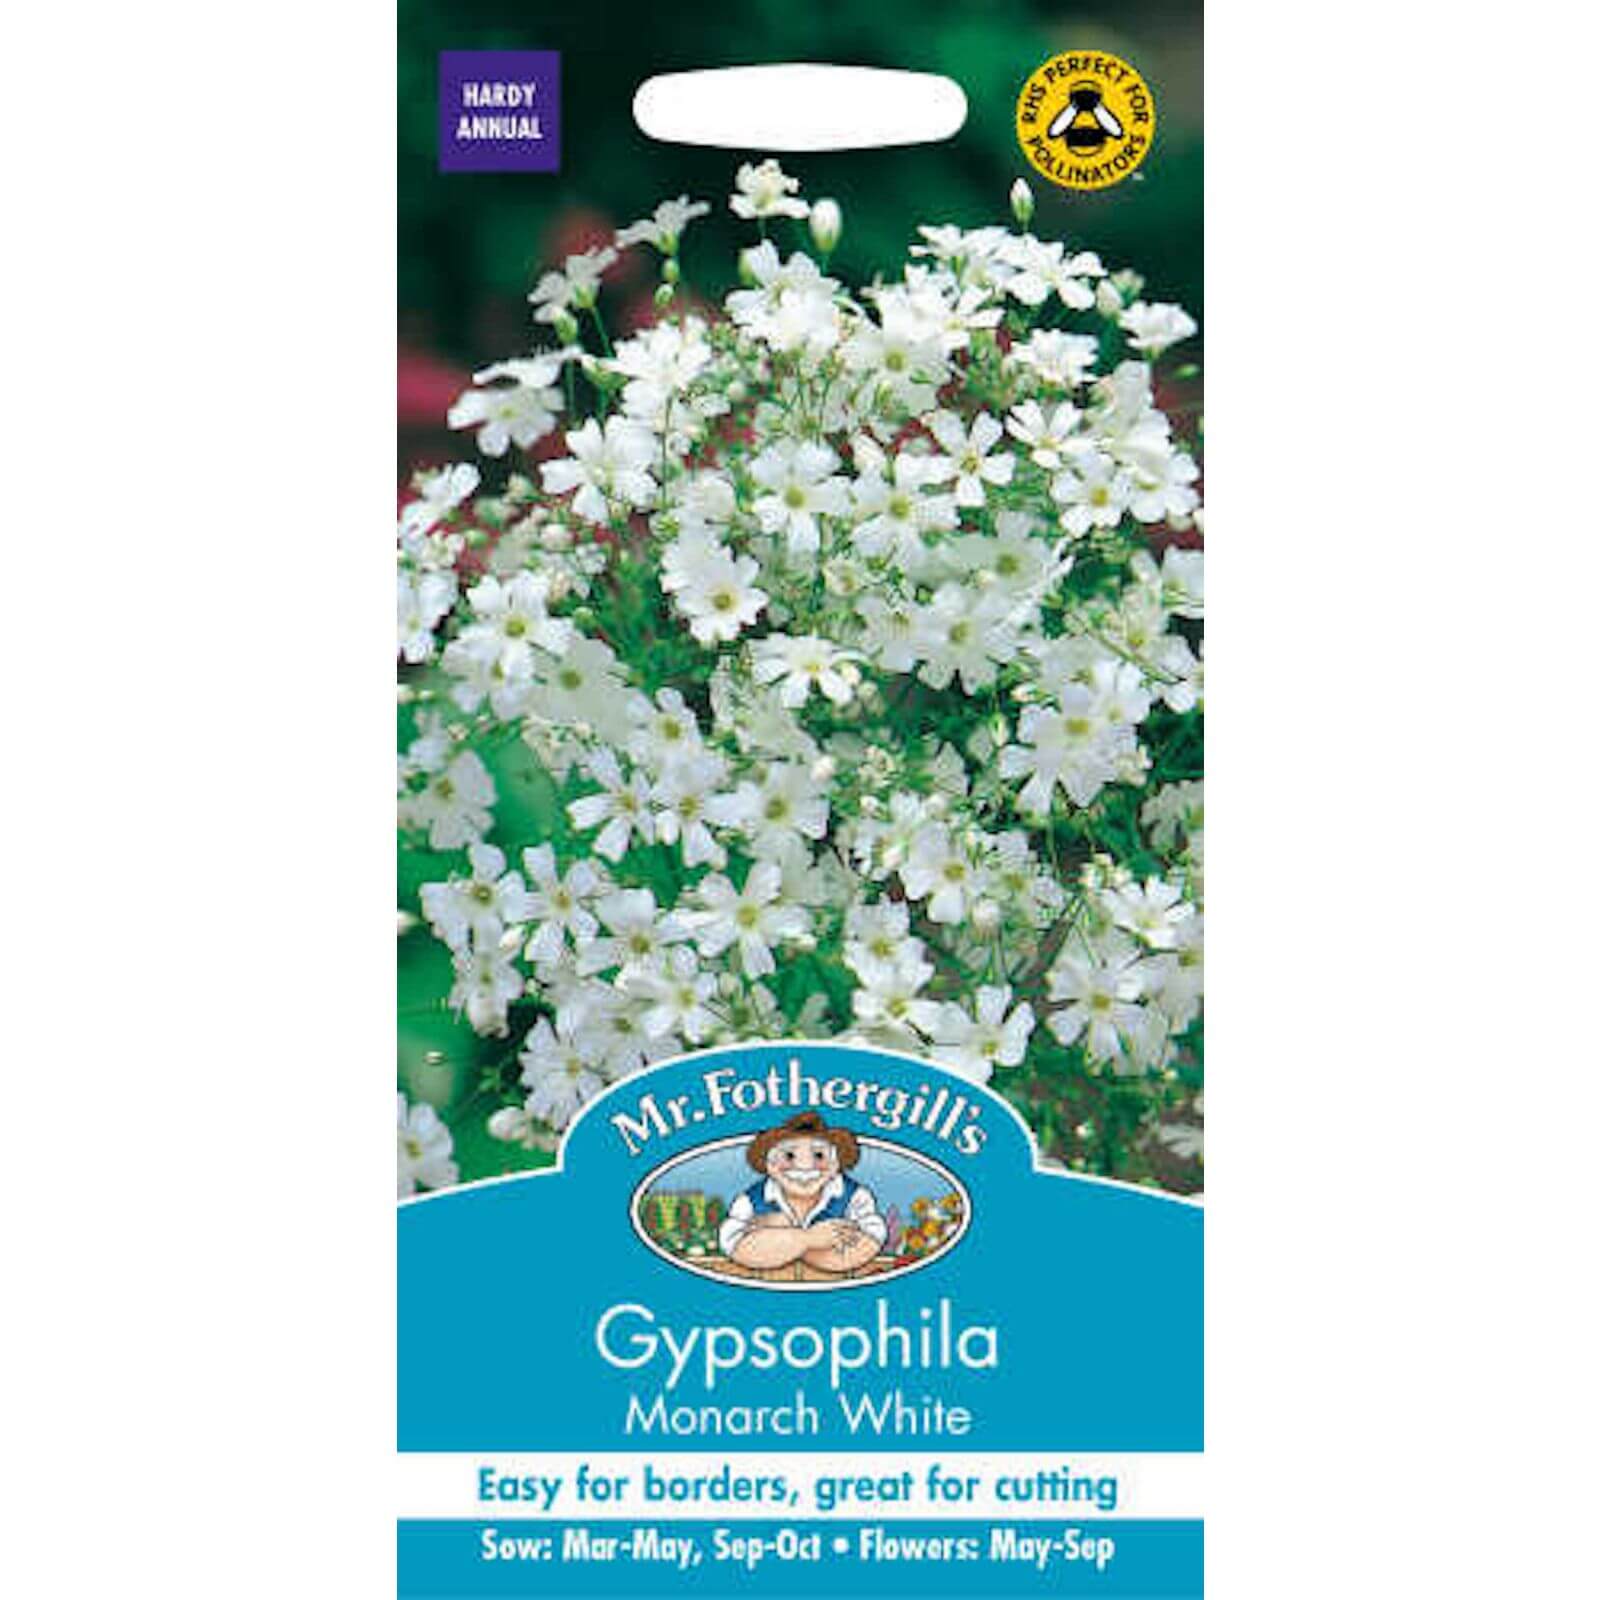 Mr. Fothergill's Gypsophilia Monarch White Seeds